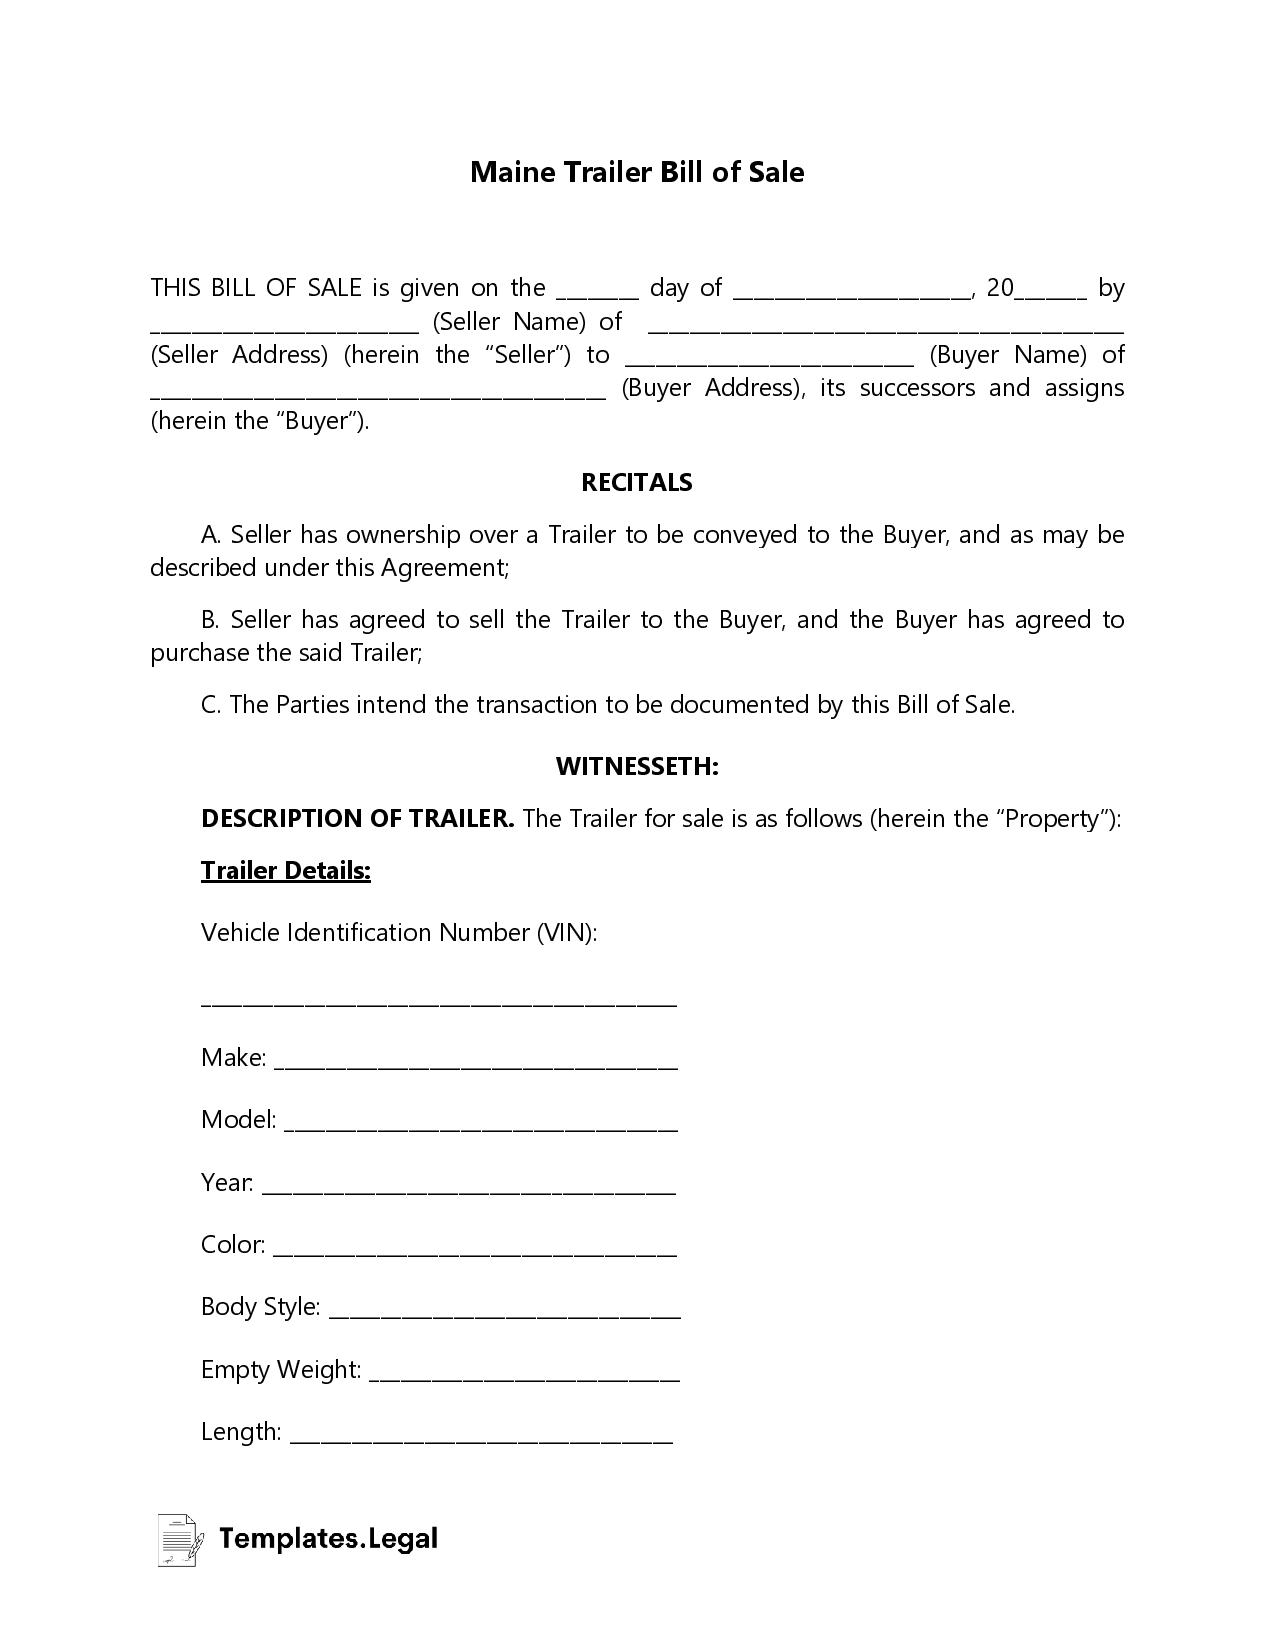 Maine Trailer Bill of Sale - Templates.Legal